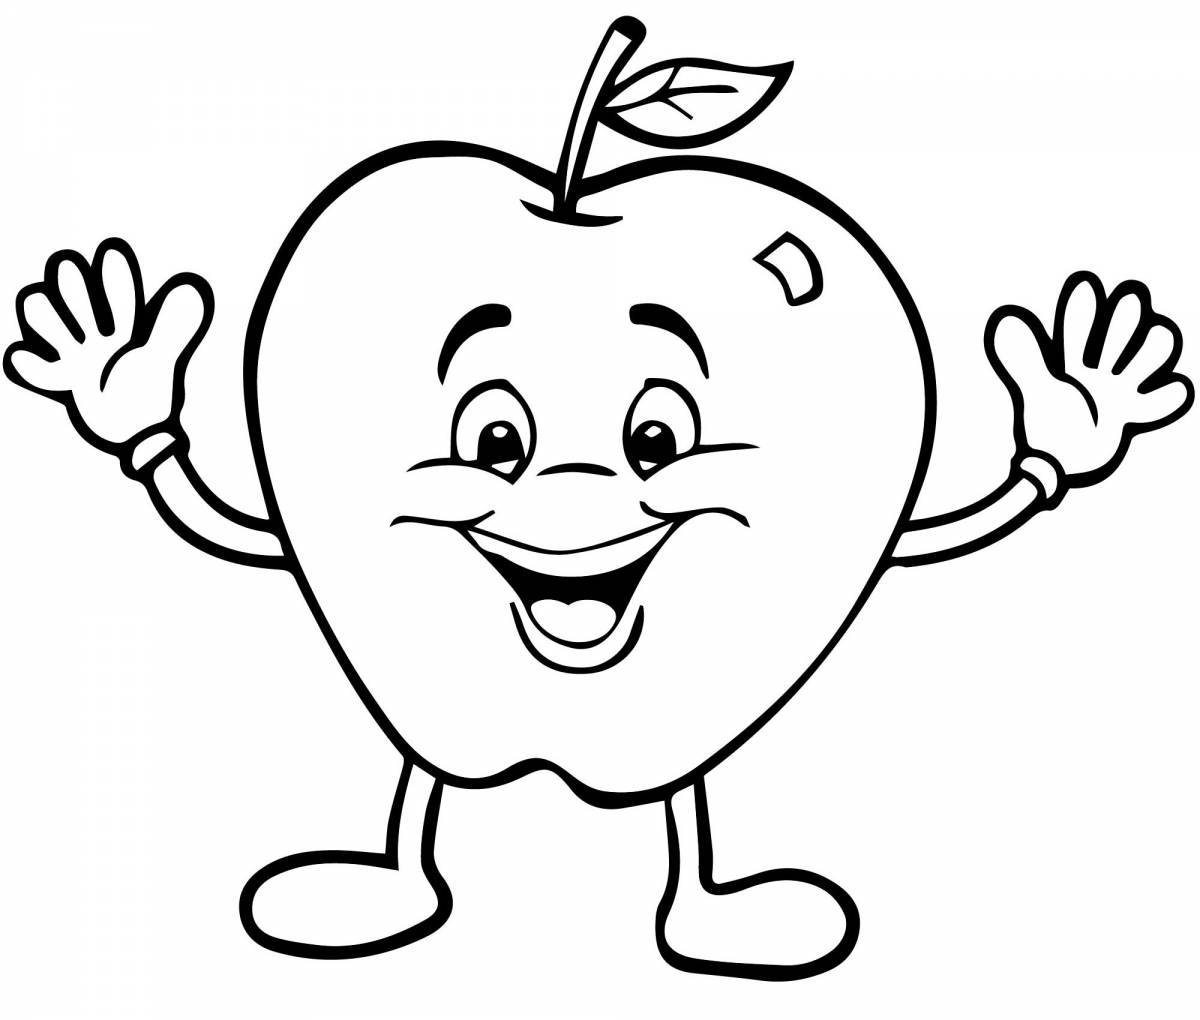 Apple color-frenzy coloring pages for kids